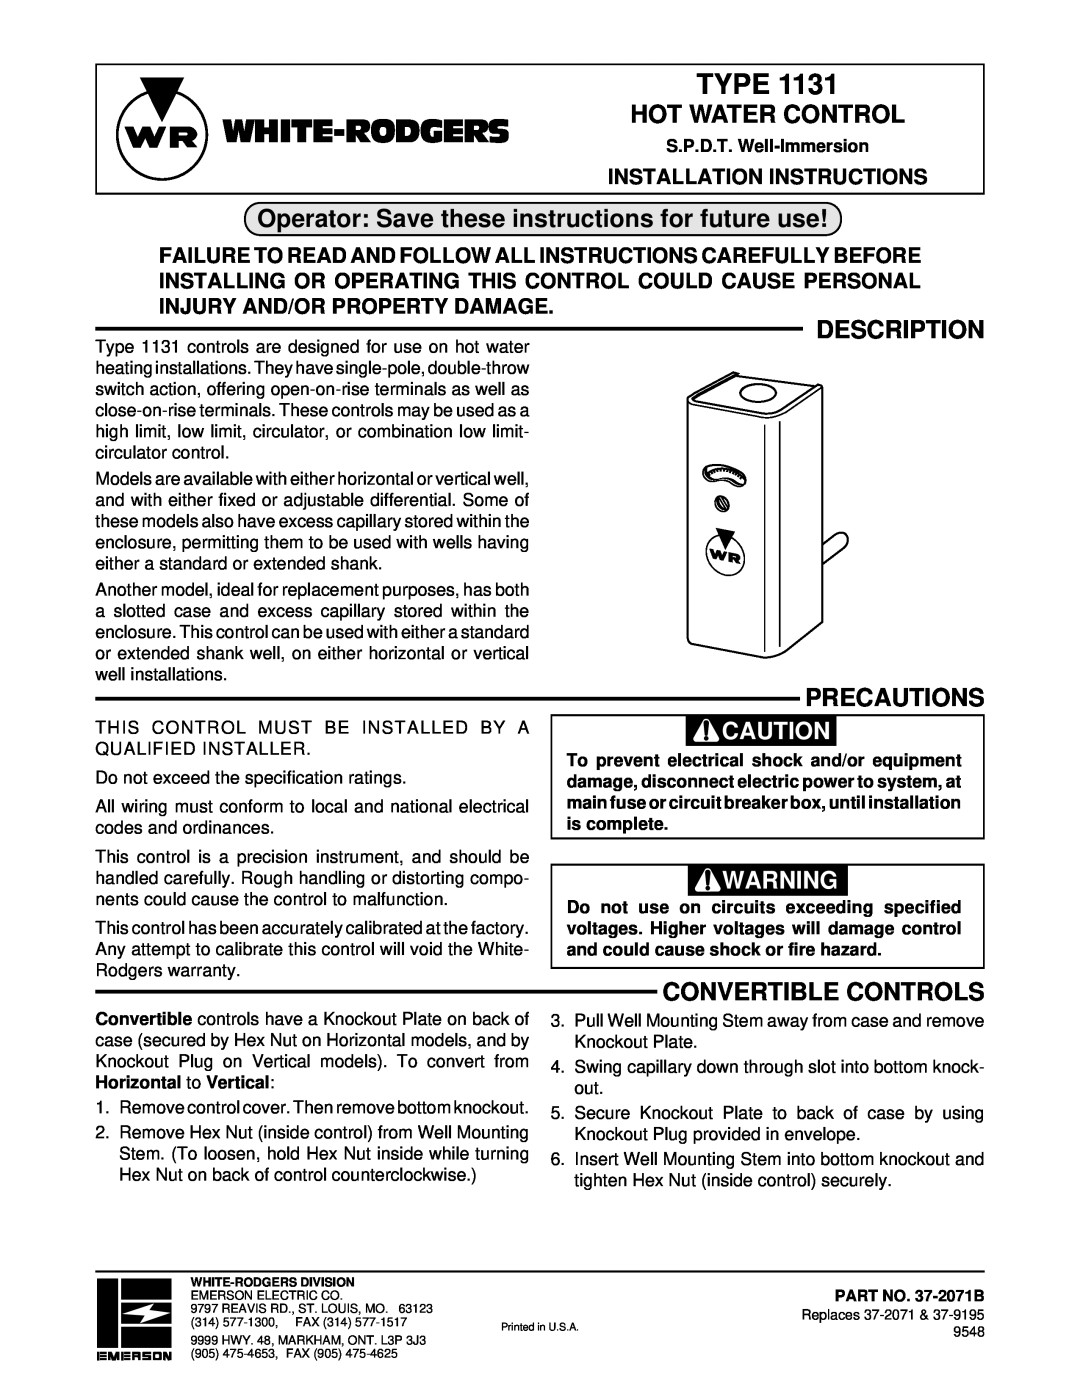 White Rodgers 1131 installation instructions White-Rodgers, Type, Hot Water Control, Description, Precautions 